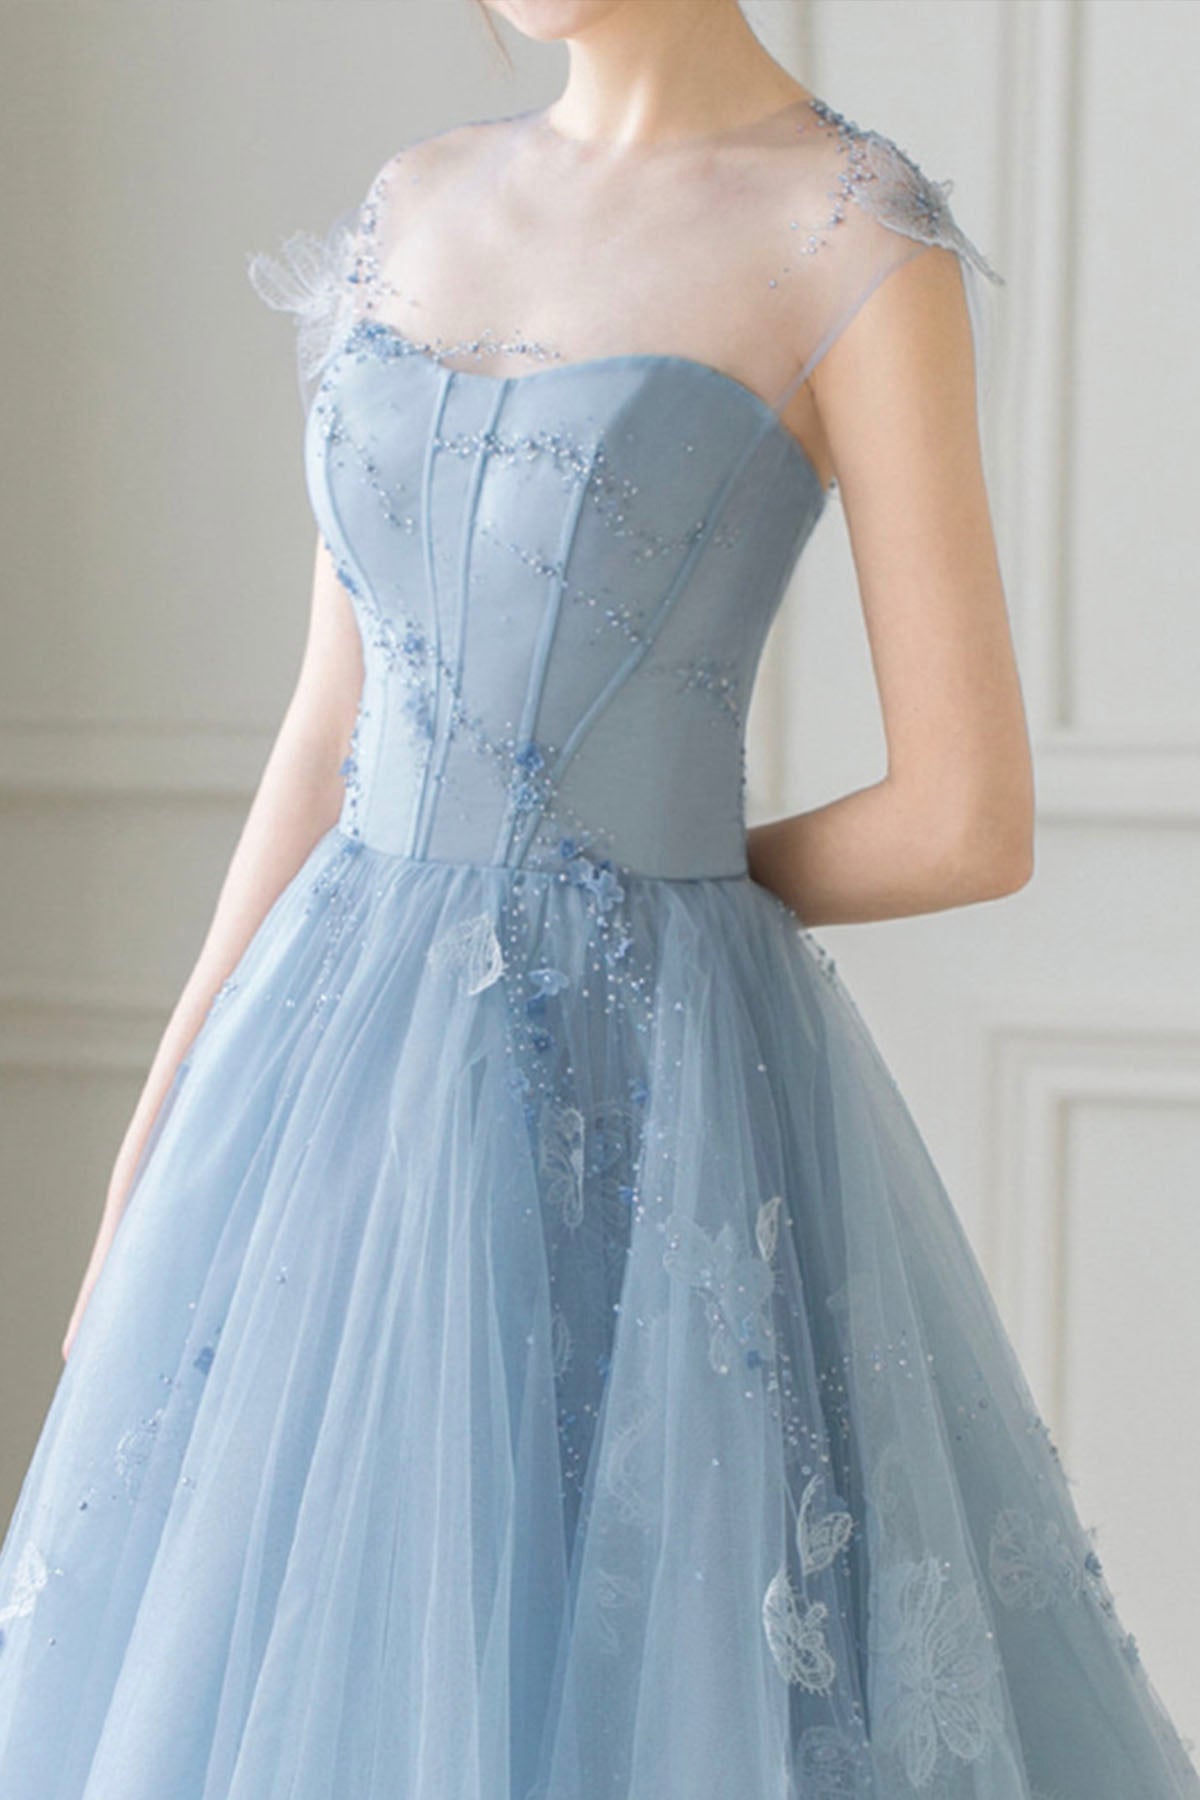 Blue Tulle Lace Short Prom Dress, Beautiful See Through Homecoming Party Dress